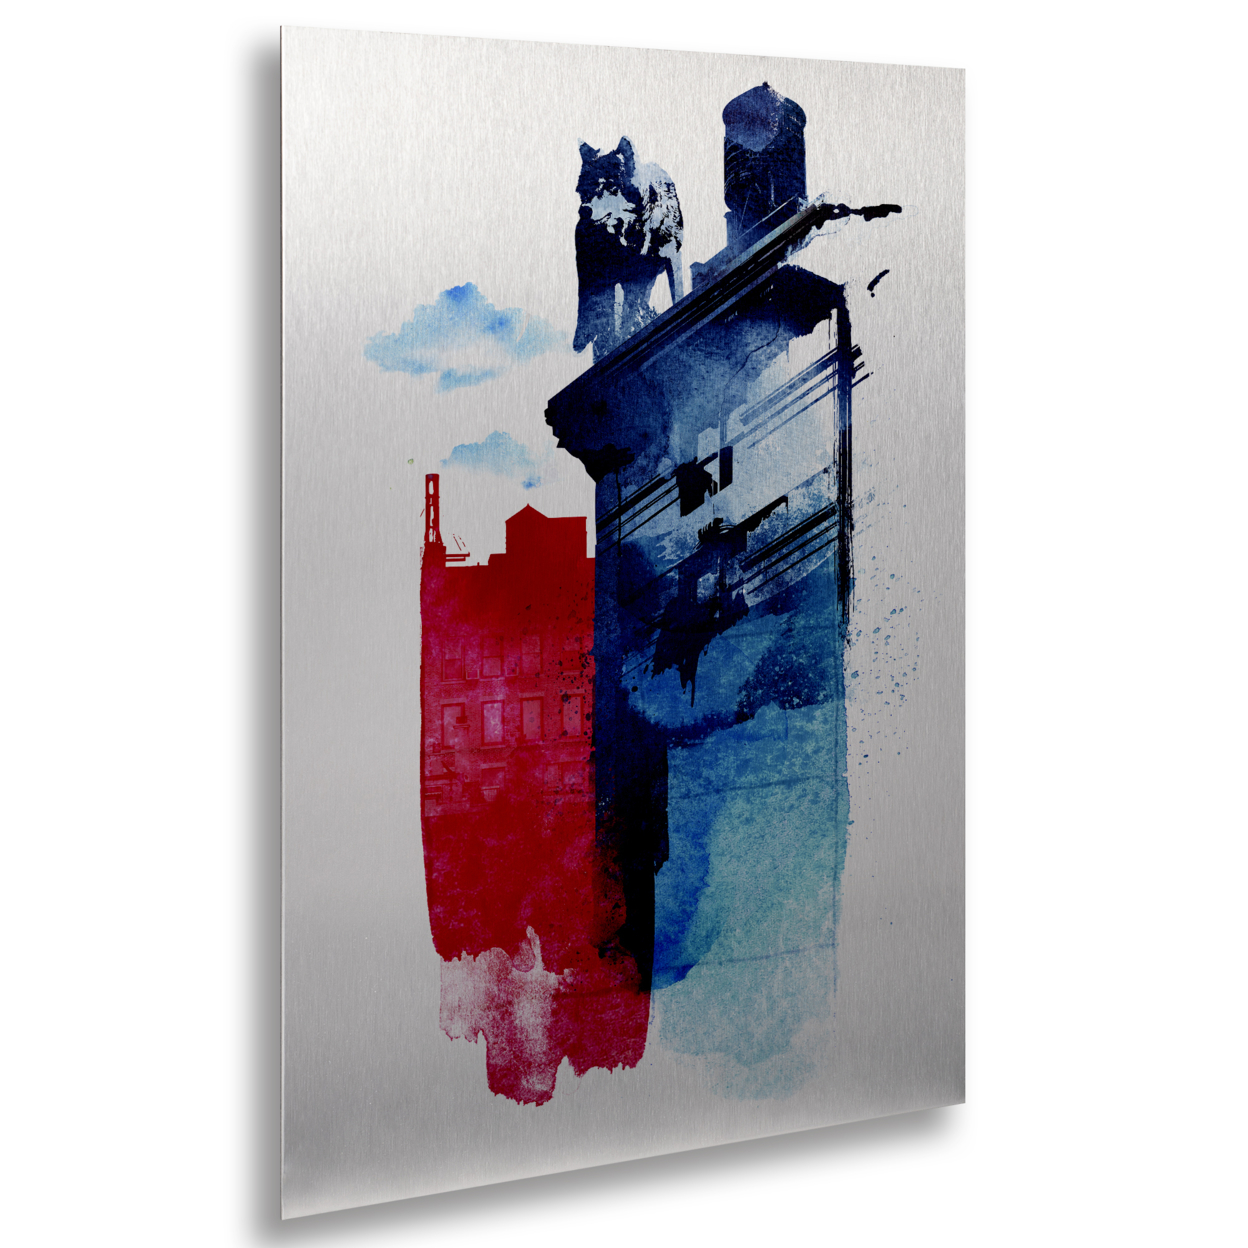 Robert Farkas 'This Is My Town' Floating Brushed Aluminum Art 16 X 22